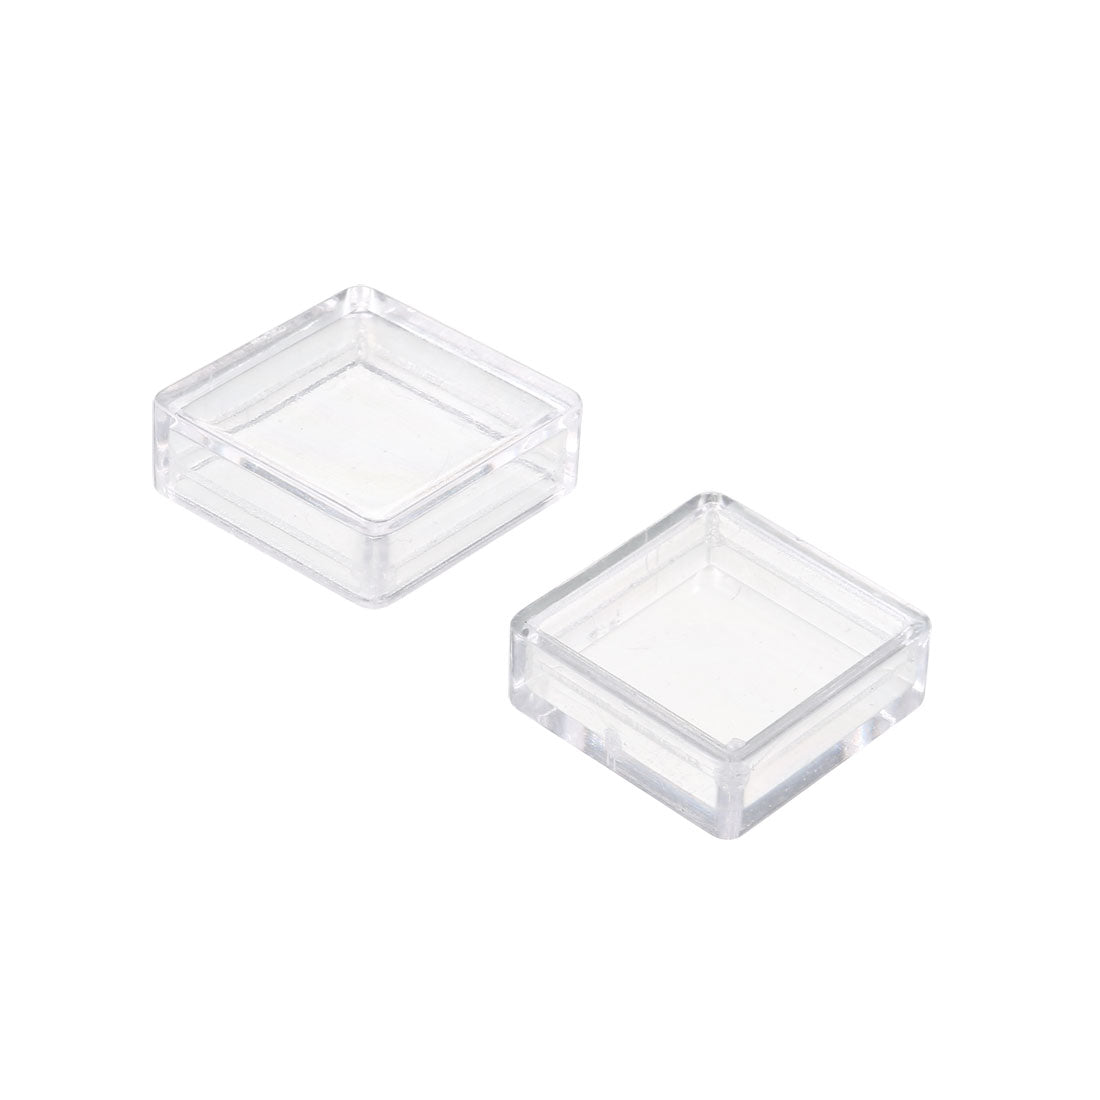 uxcell Uxcell 30Pcs 12x12mm Plastic Pushbutton Tact Switch Caps Cover Keycaps Transparent for A14 Tactile Switch